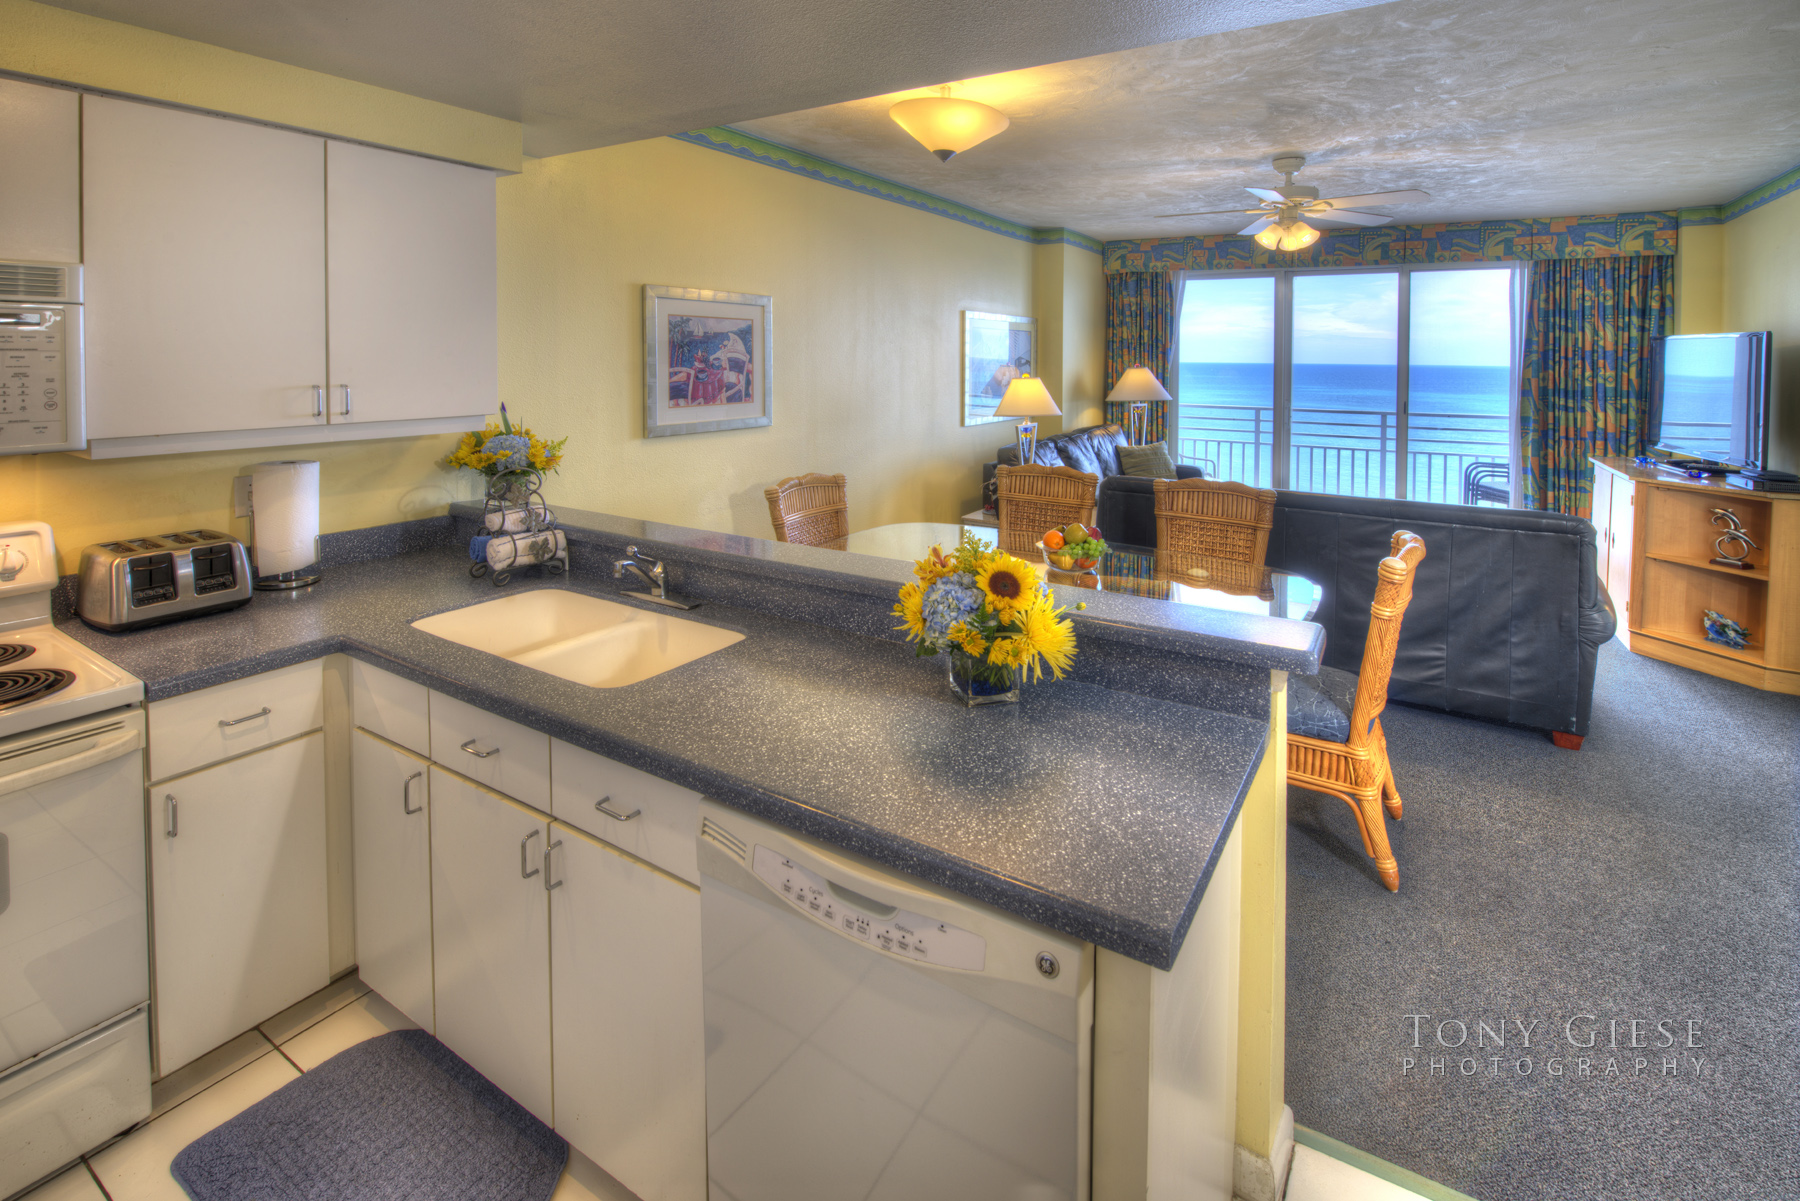 Wyndham Ocean Walk Resort newly remodeled kitchen area with all the latest appliances and a ocean view of Daytona Beach, Florida. Photography by Tony Giese